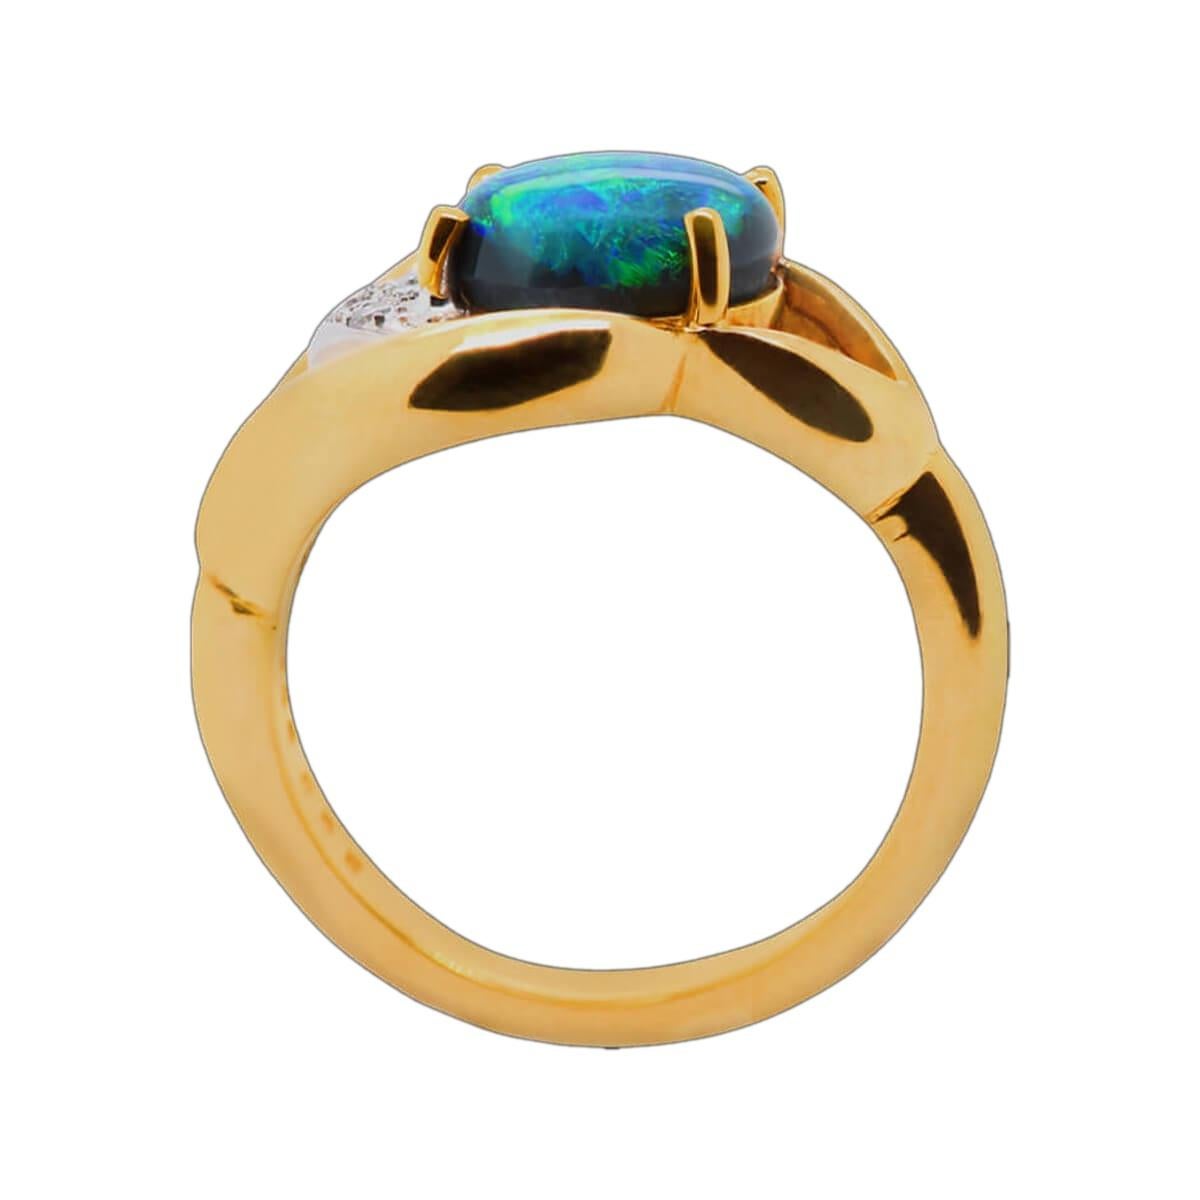 Blue-green black opals are all the rage, and this one will not disappoint. It is a very bright stone and fits perfectly with the bespoke 18K solid gold and platinum ring with brilliant white diamonds. A high cabochon stone that shows colours from